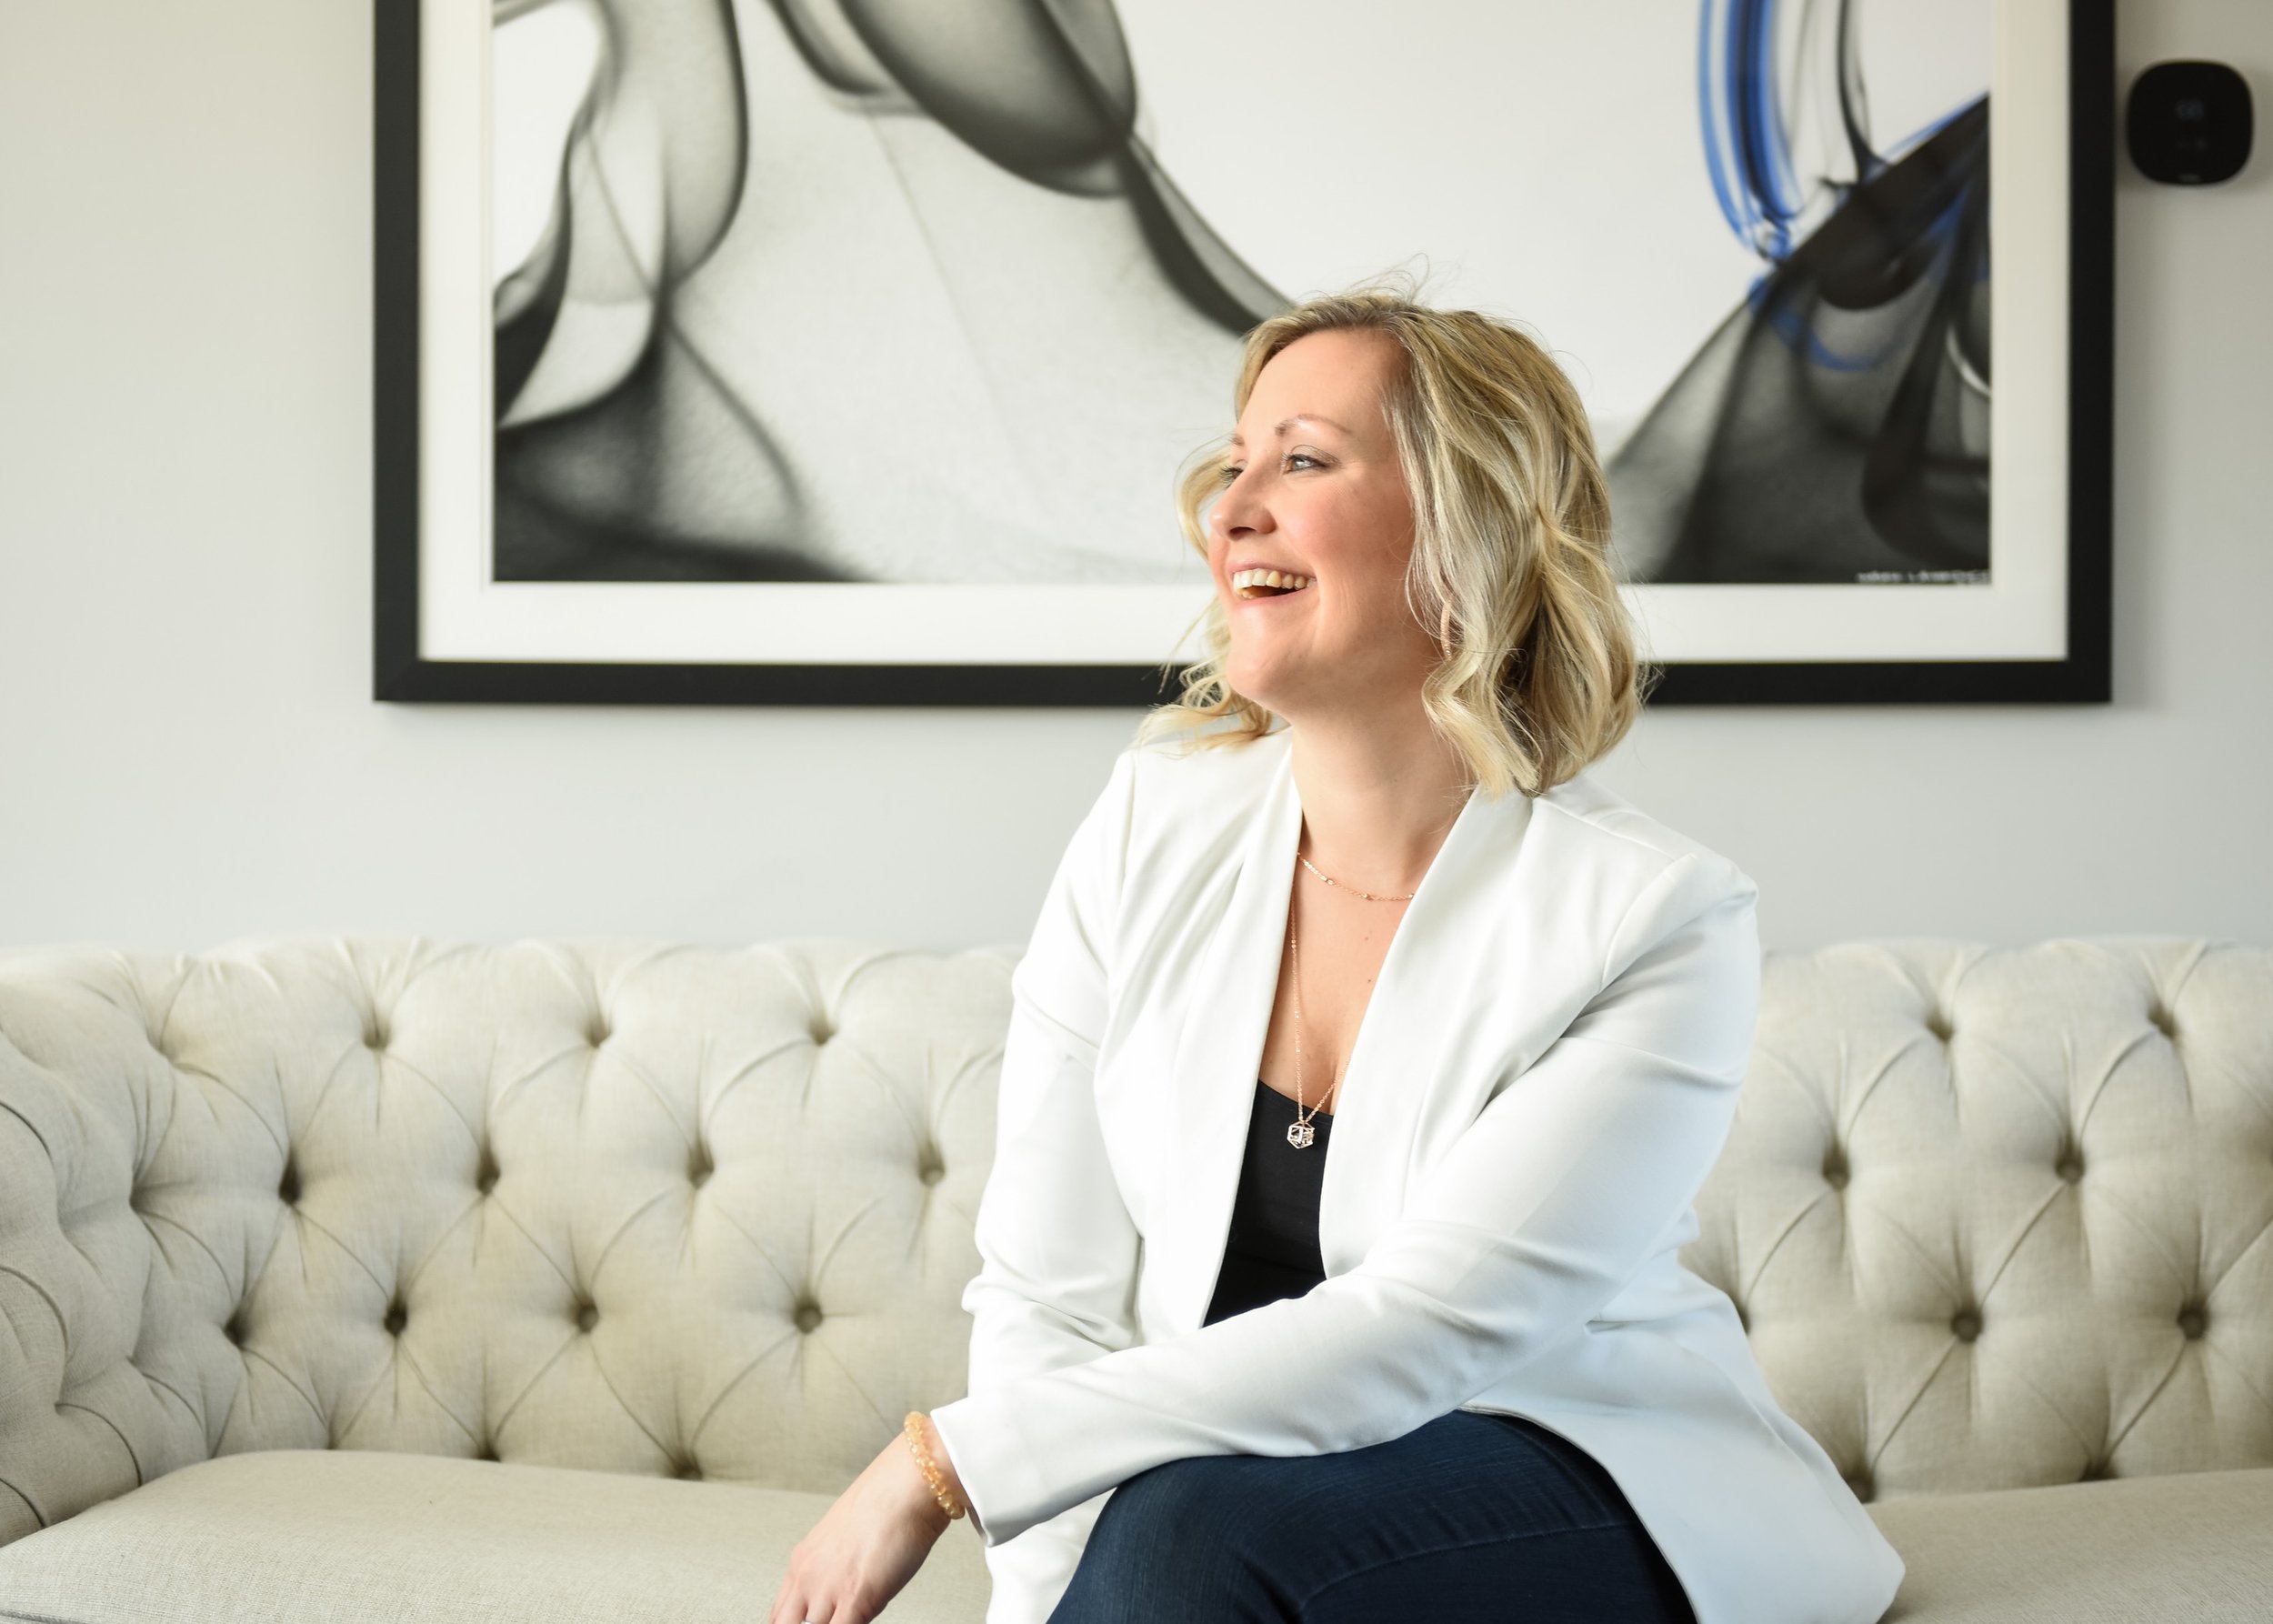 Woman in white blazer sitting on a tufted sofa, smiling and looking away - how to take personal branding photos for Instagram.